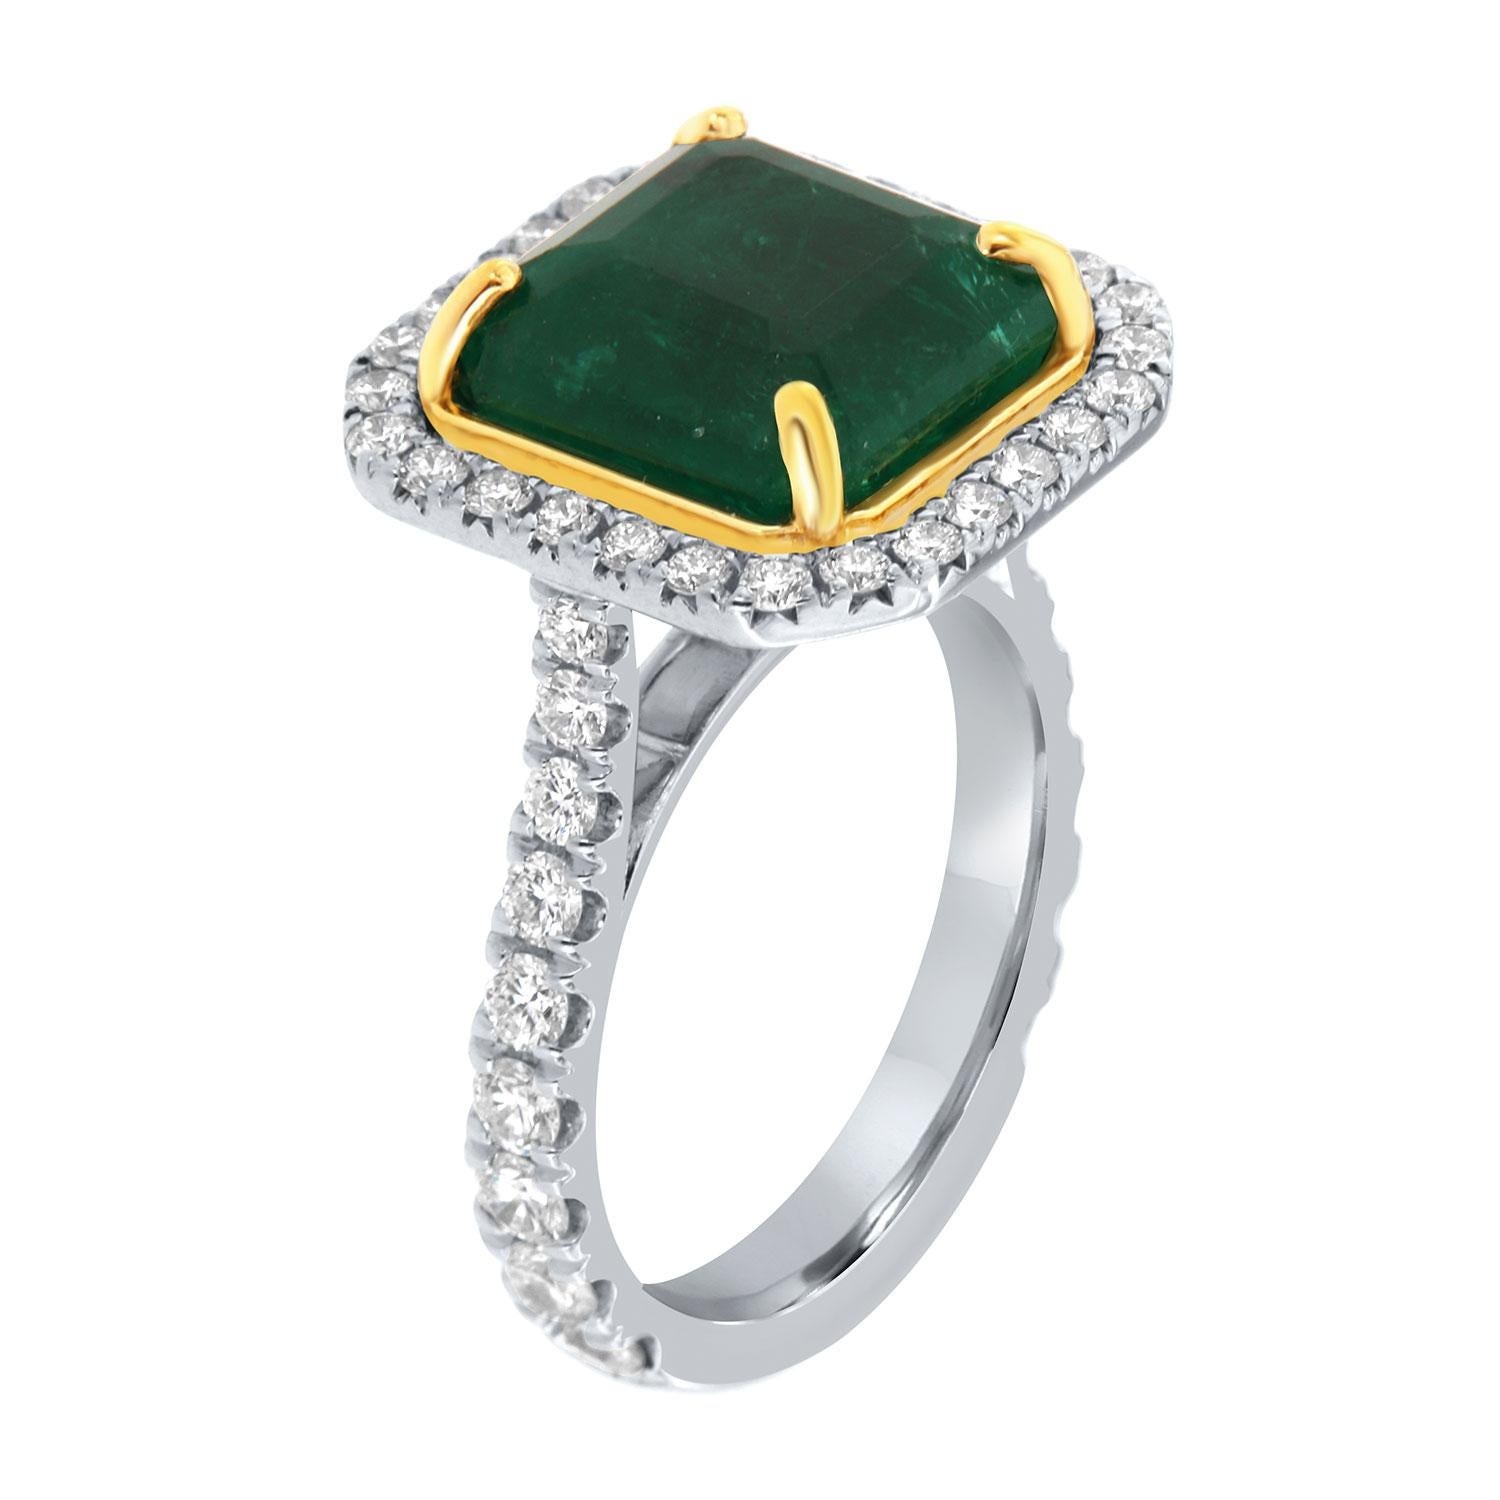 This 18k white and yellow gold ring features a 7.74 Carat Asscher cut Natural Green emerald from Zambia. It is encircled by a halo of brilliant round diamonds on a band that is tapering up starting at 2.4mm wide to 3.4 mm wide. The diamonds are